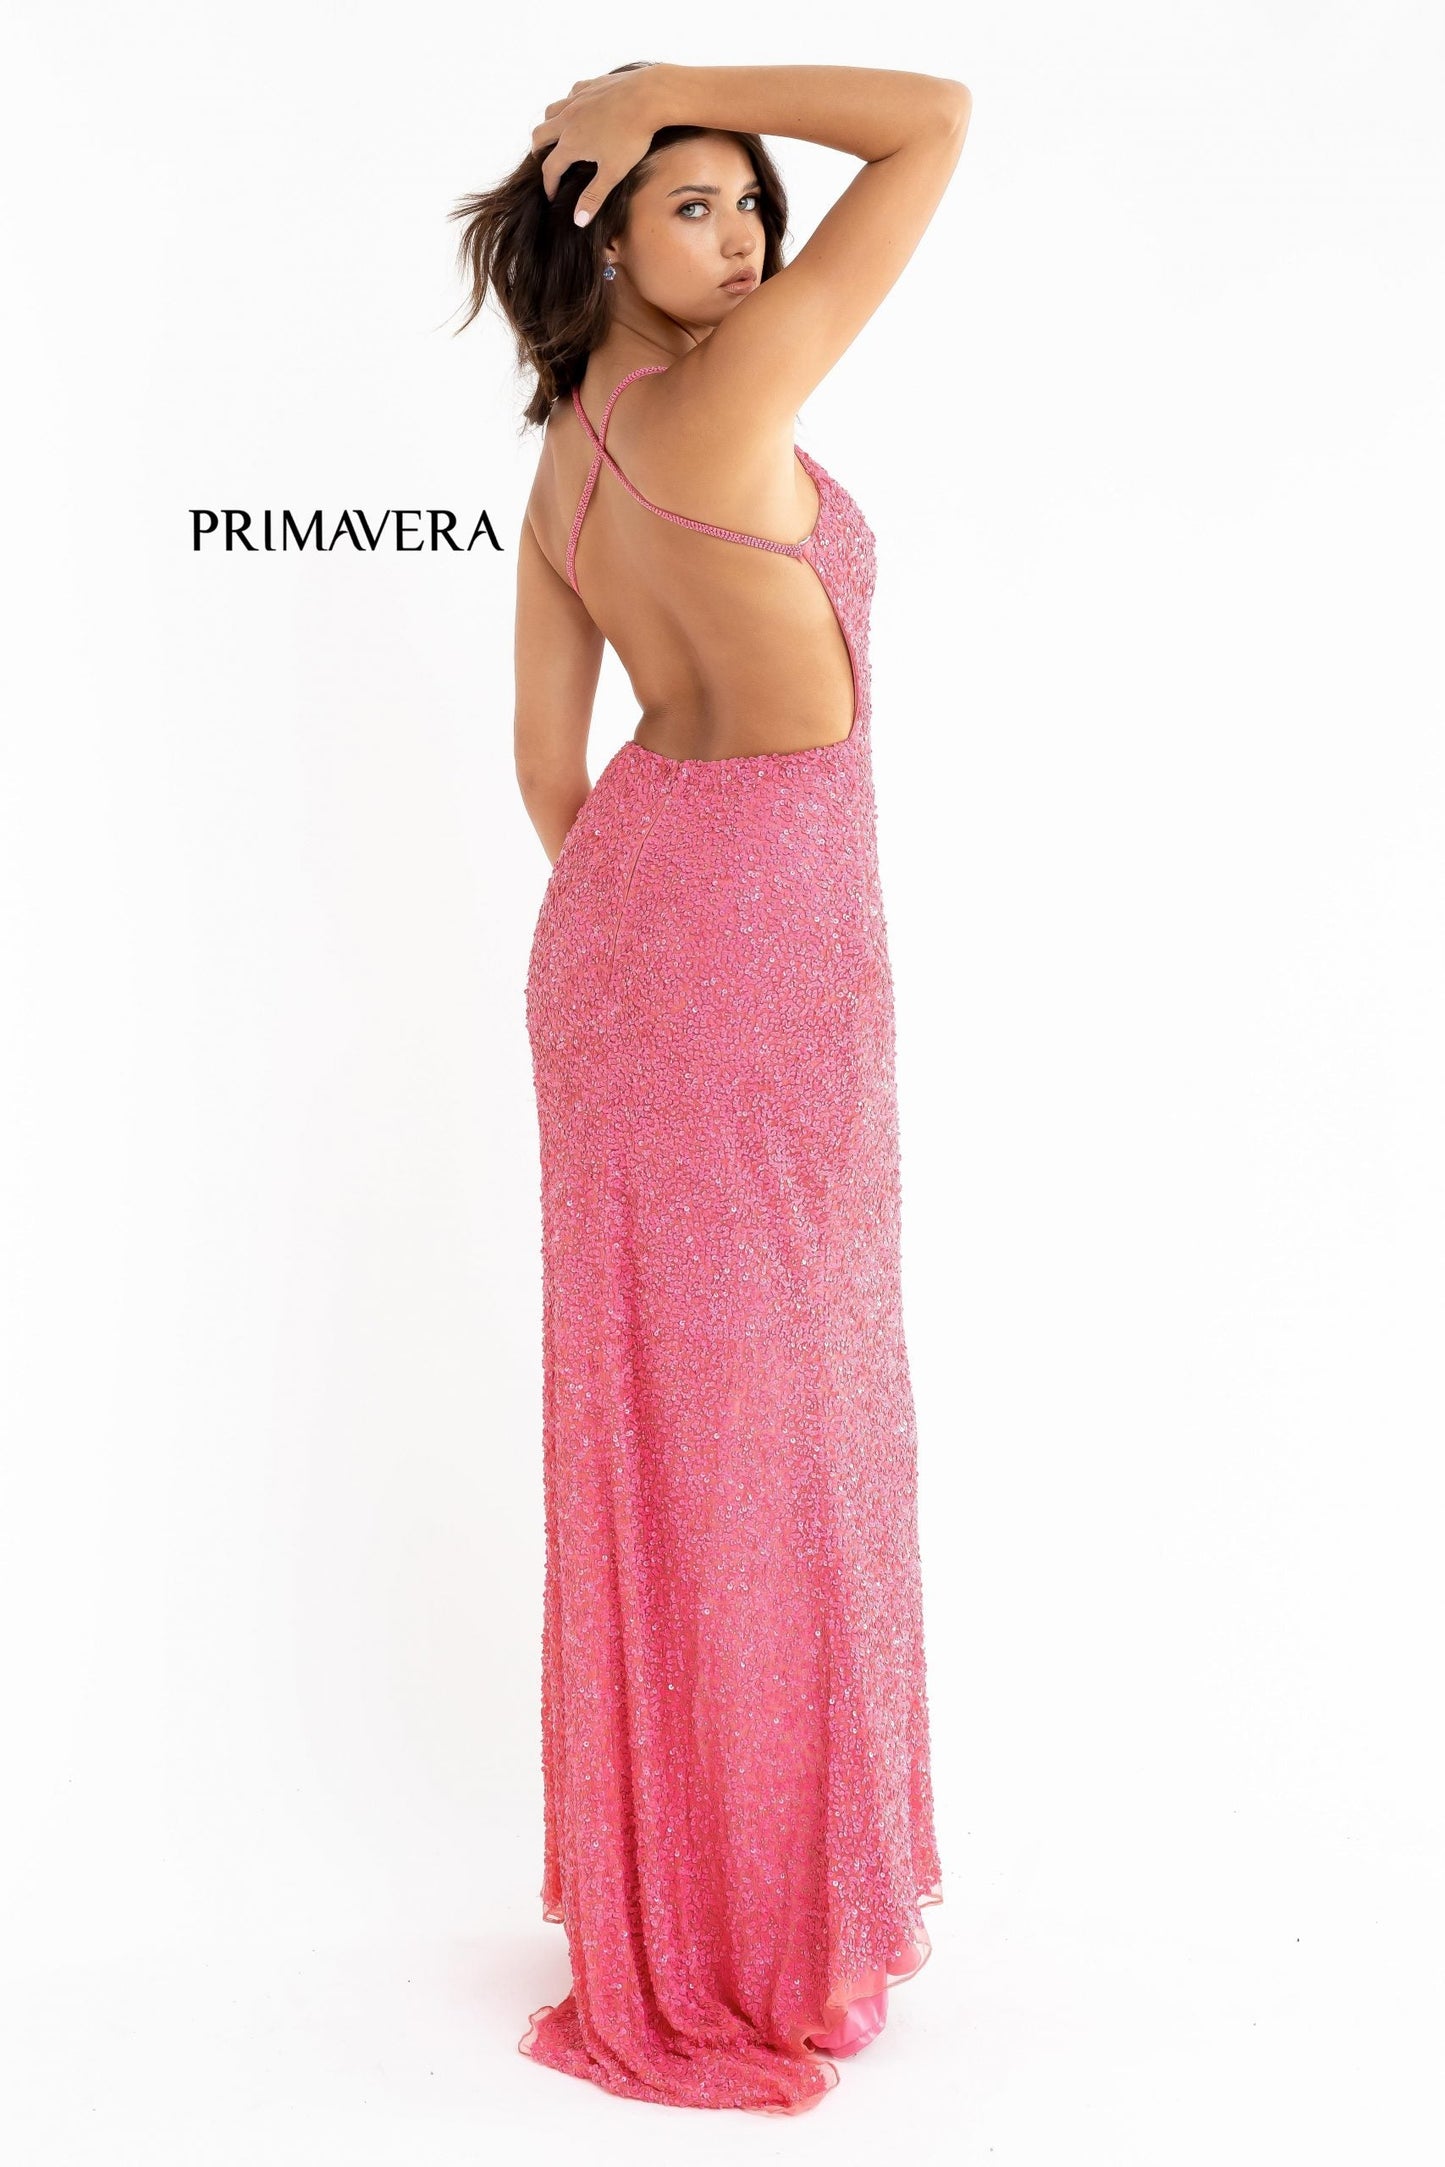 Primavera Couture 3291 Size 2 Purple Long Fitted Backless Sequin Prom Dress Formal Gown Slit